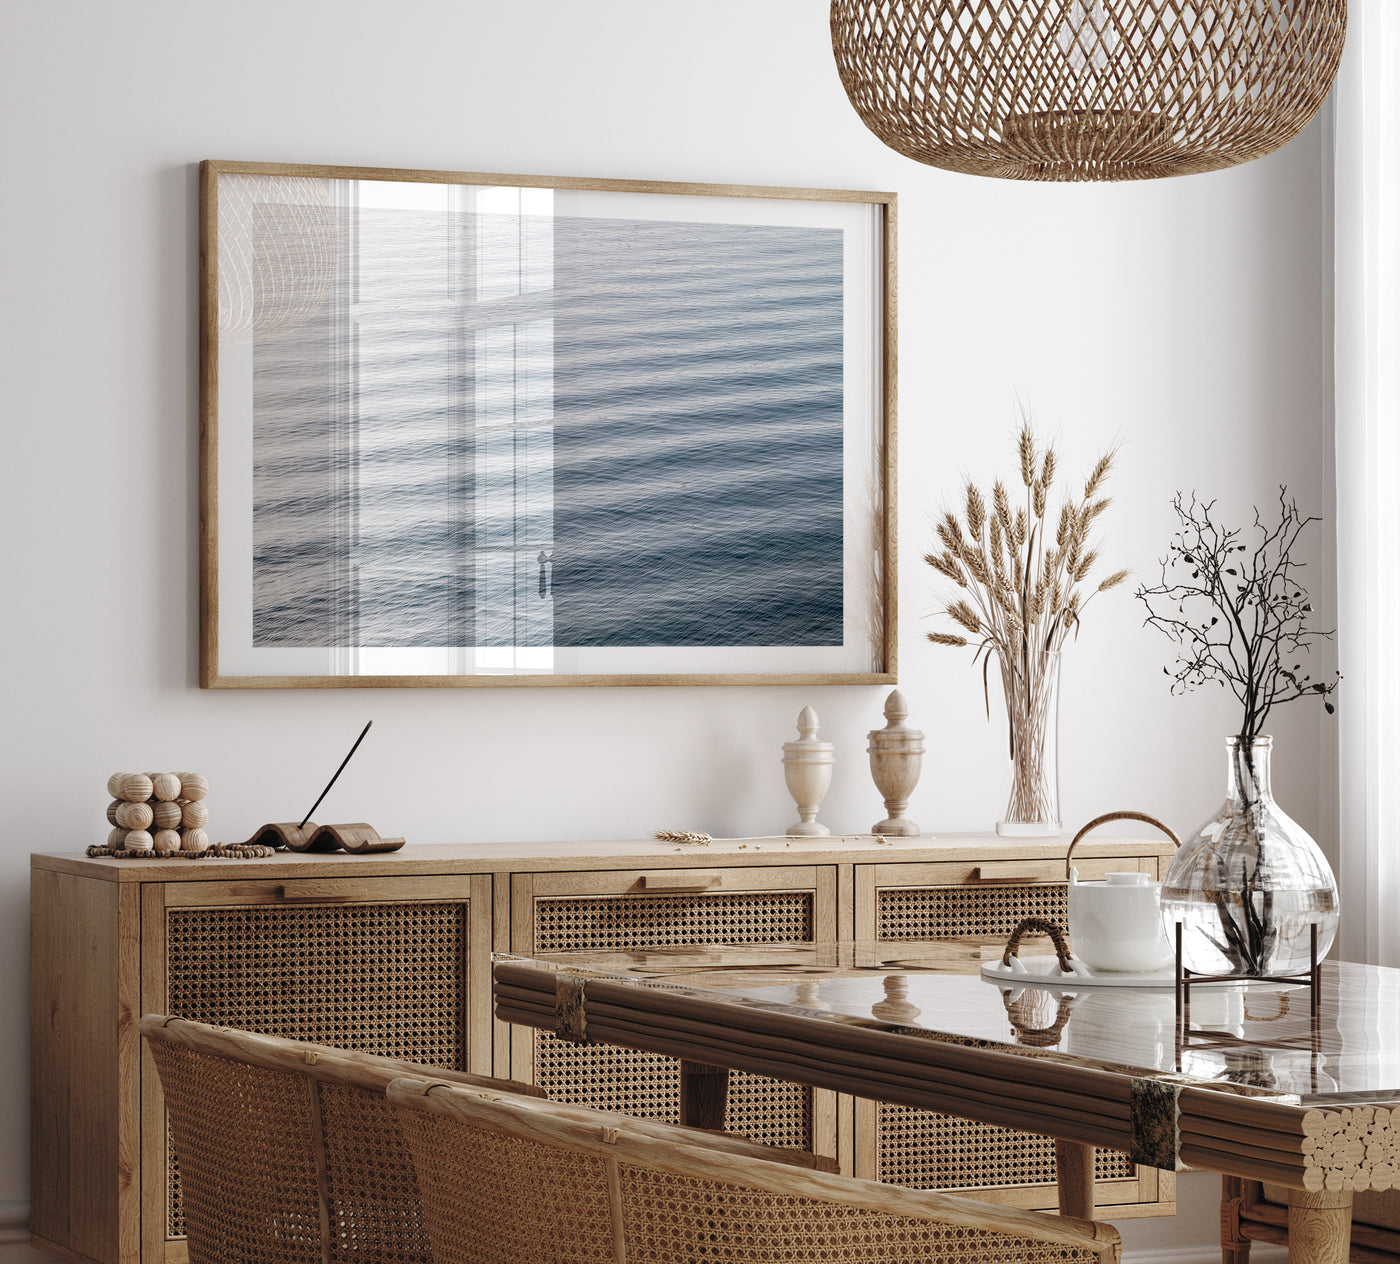 Waves - Coastal wall art by Cattie Coyle Photography in dining room